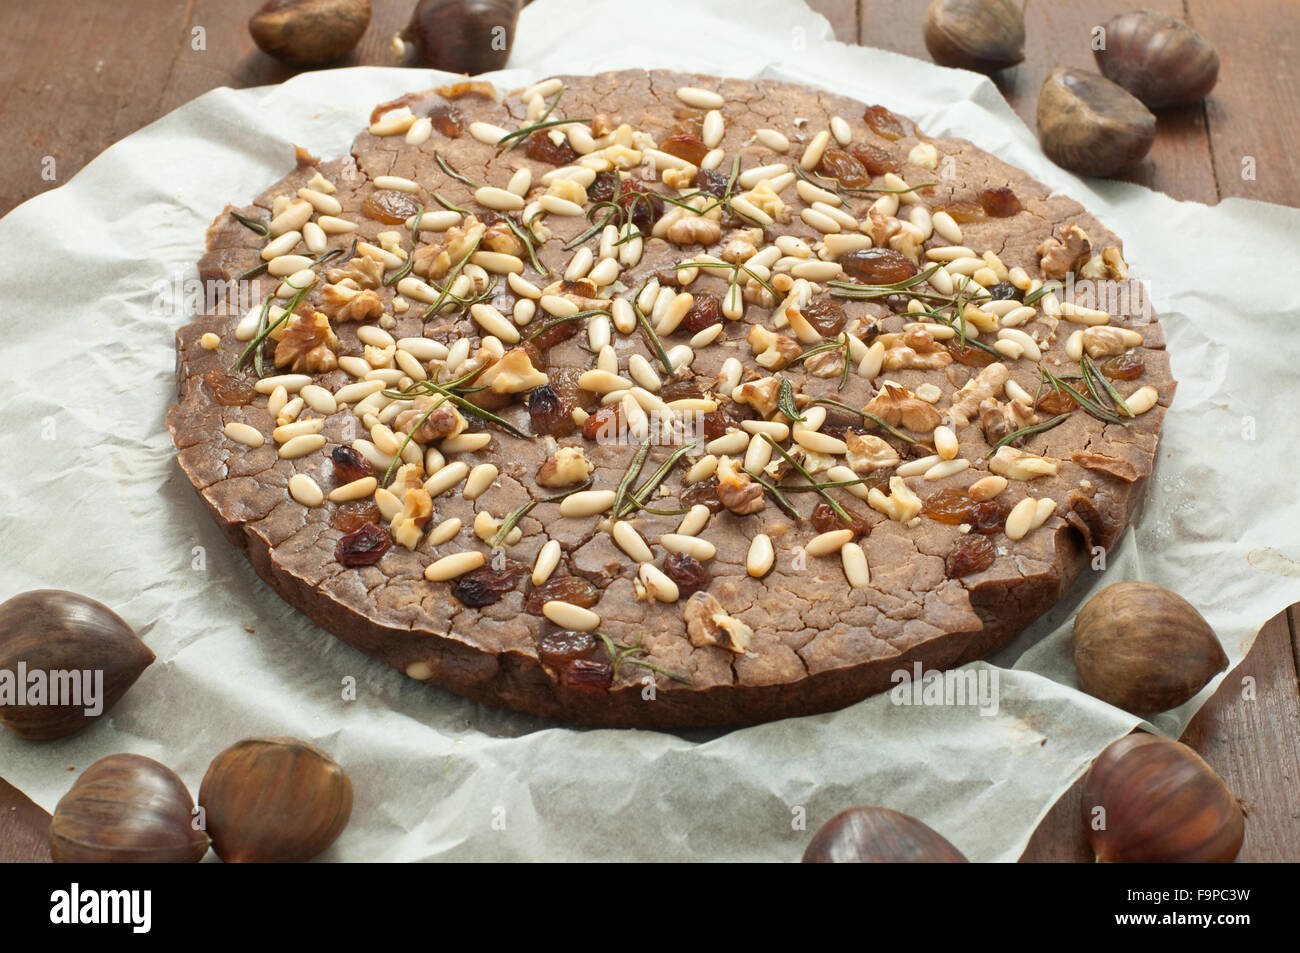 Typical Italian sweet chestnut cake made with chestnuts, italy Stock Photo